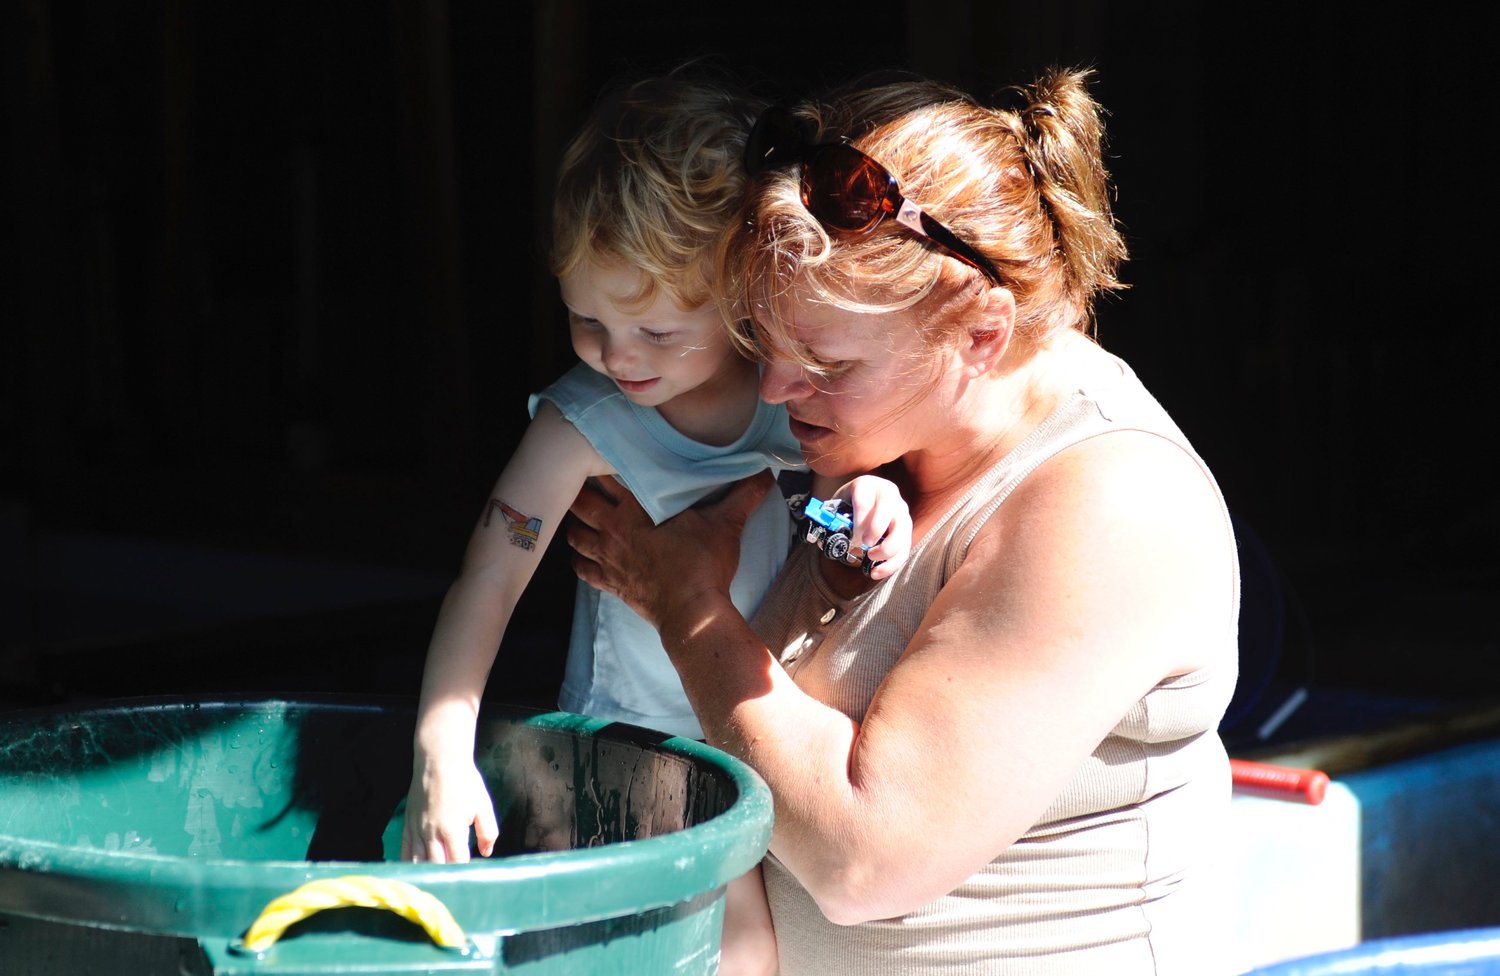 The wonder of life. Jill Grishaber of Jeffersonville, NY, shows 2-year-old Tanner Meckle a basket full of brown trout. In a few minutes, the trout will yield thousands of eggs.